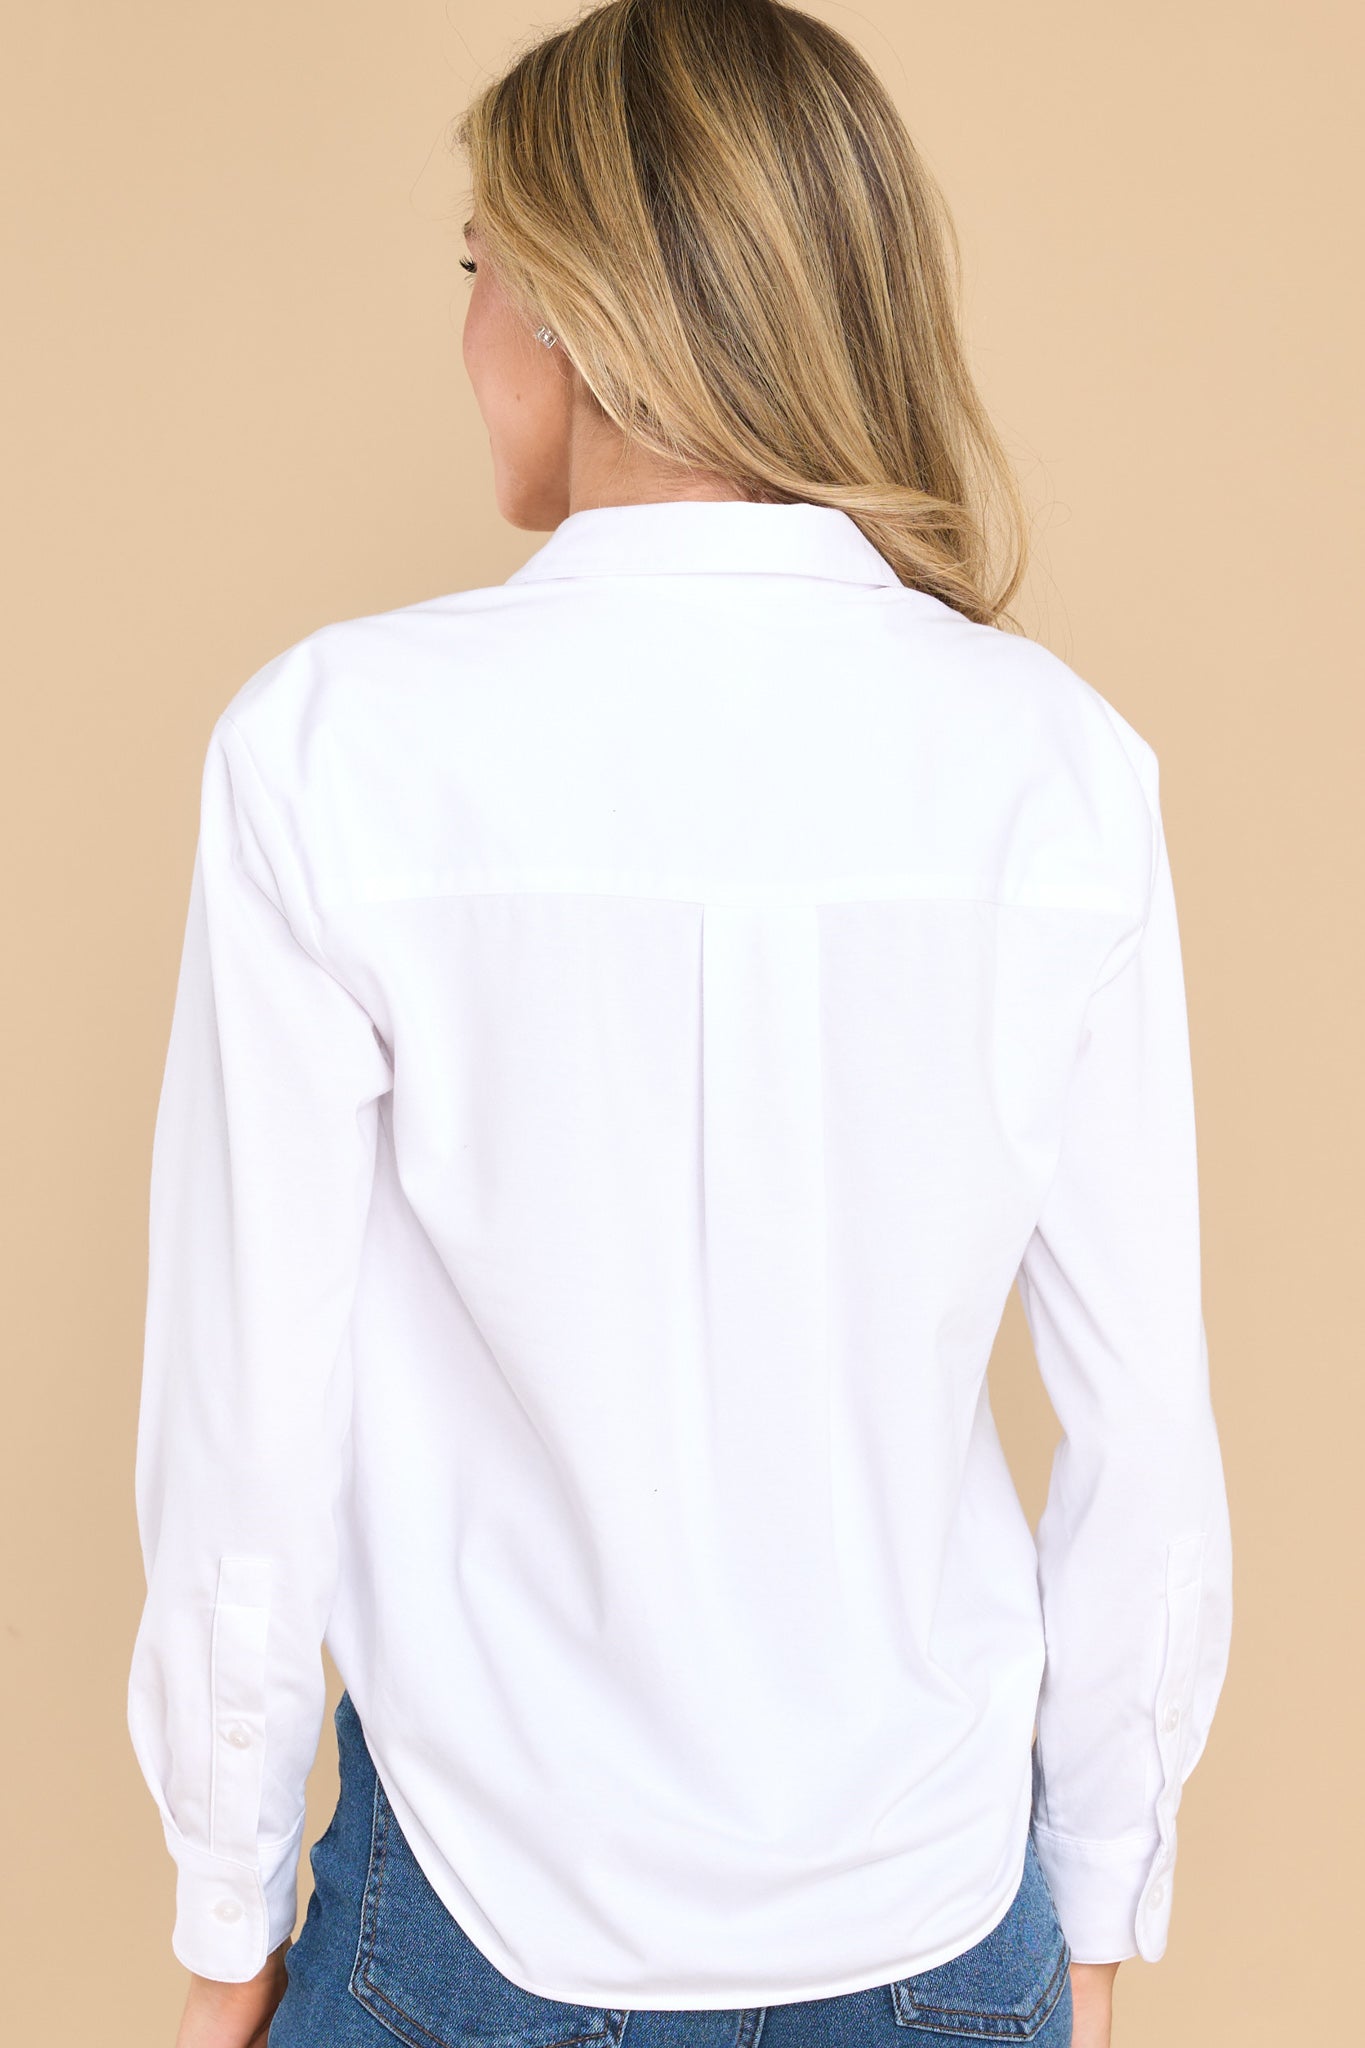 Spanx Shaping Button Down Bodysuit in Classic White - All Tops